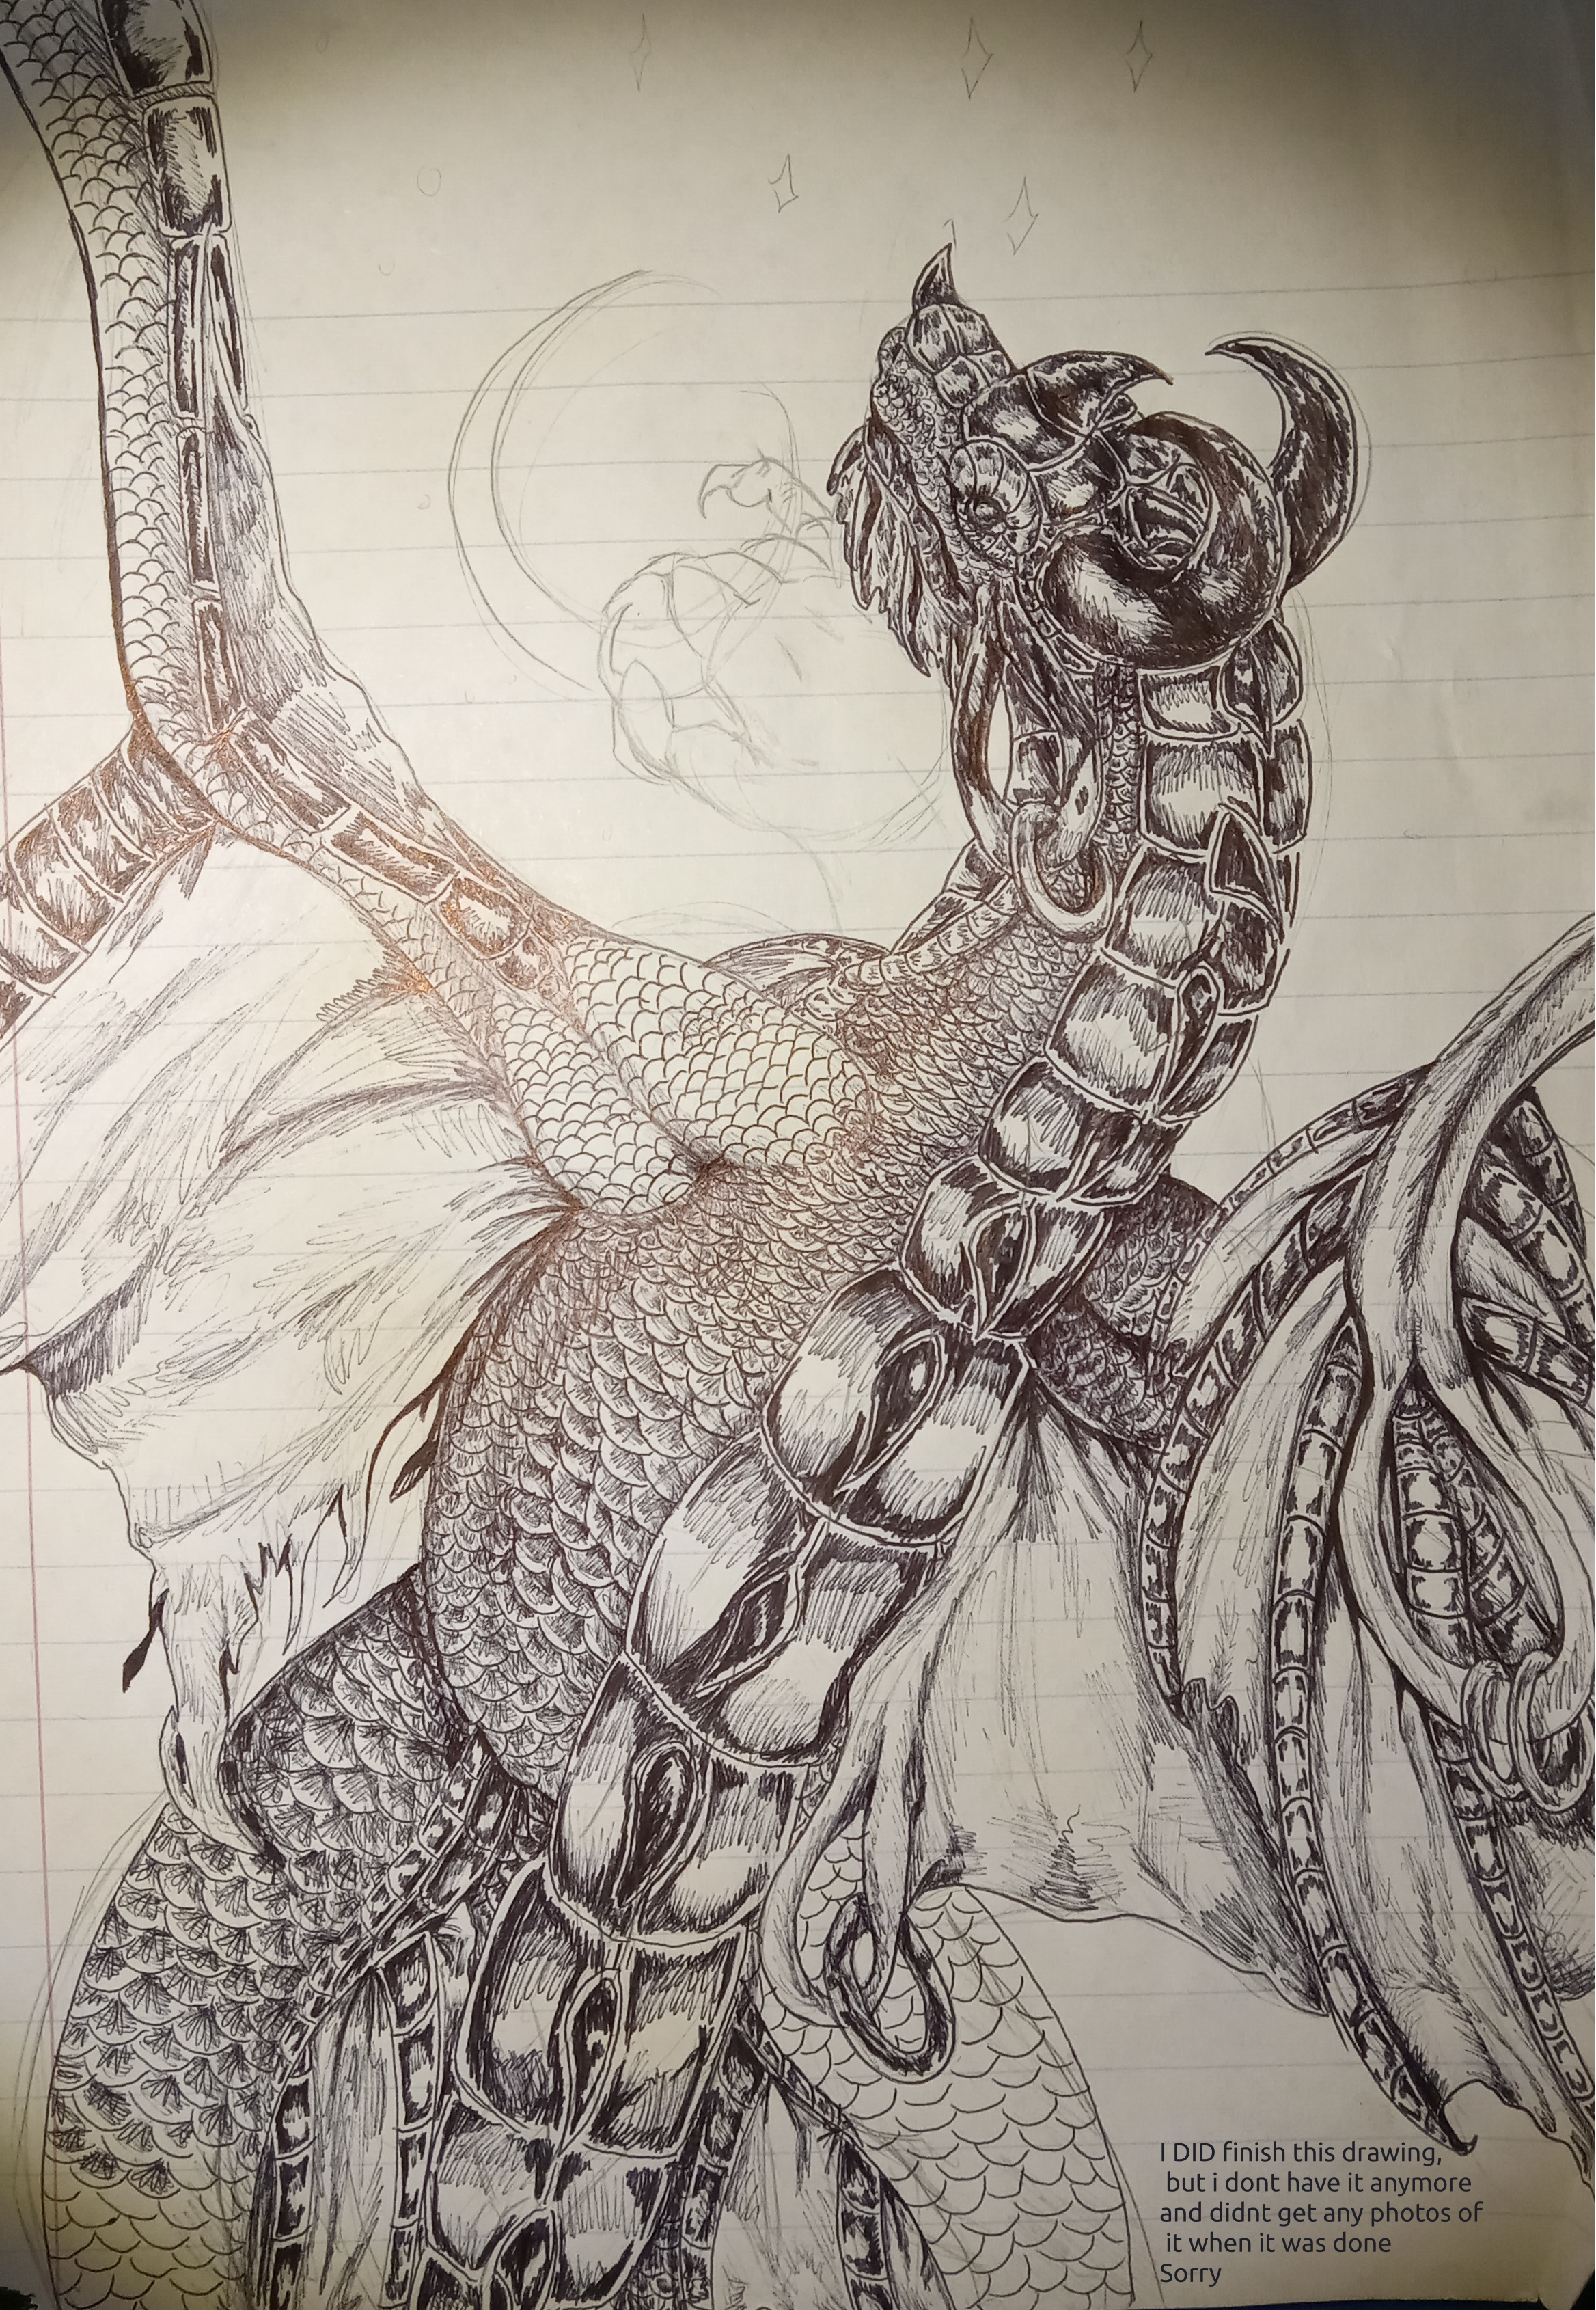 An unfinished portrait of a space dragon holding the moon in her claw, made on lined paper. A note in the corner of the image reads, 'I did finish this drawing, but I don't have it anymore and didn't get any photos of it when it was done. Sorry' 